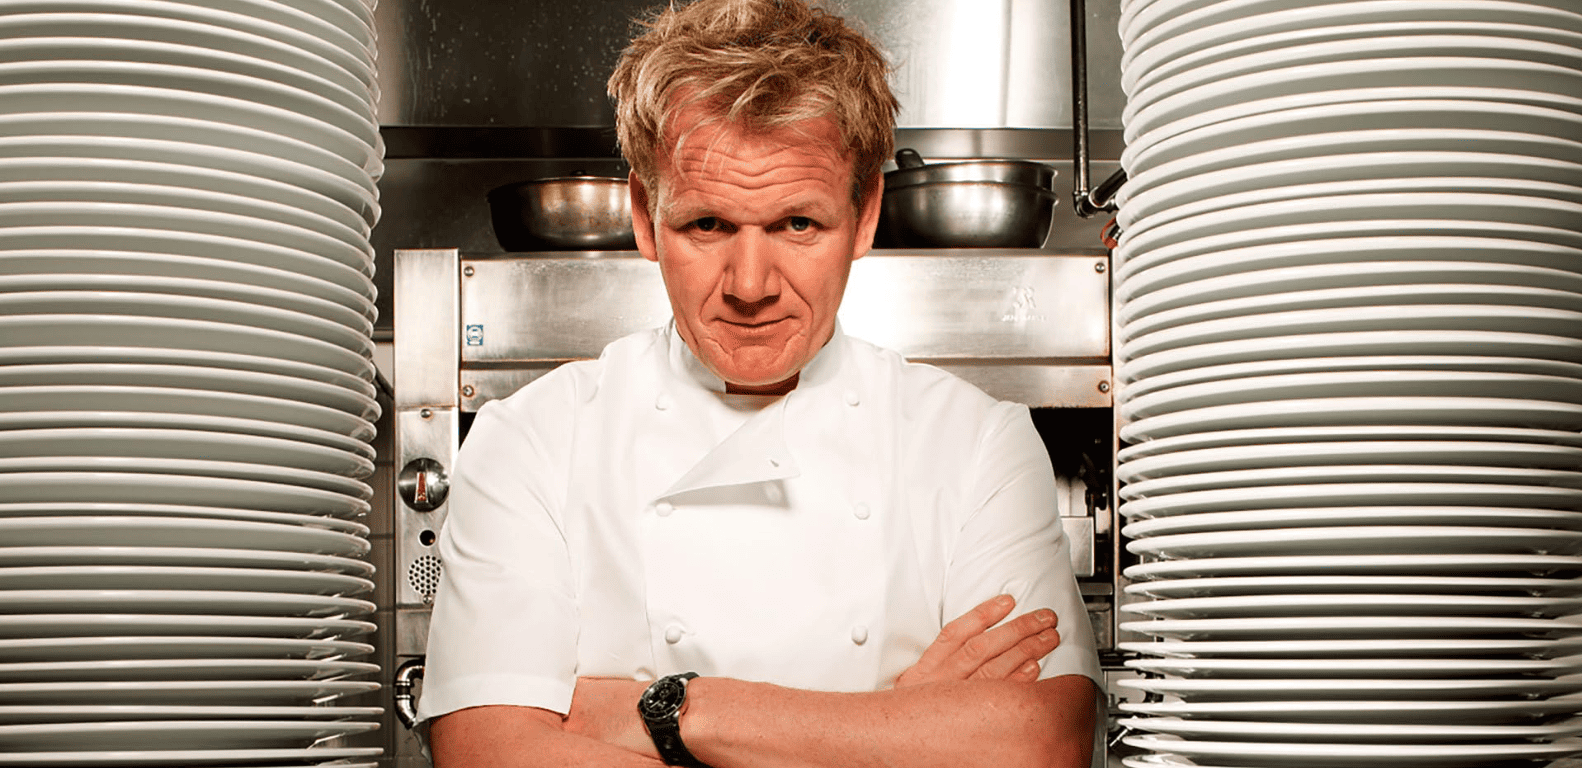 Gordon Ramsay between two stacks of plates while crossing his arms in this image from Studio Ramsay Global.